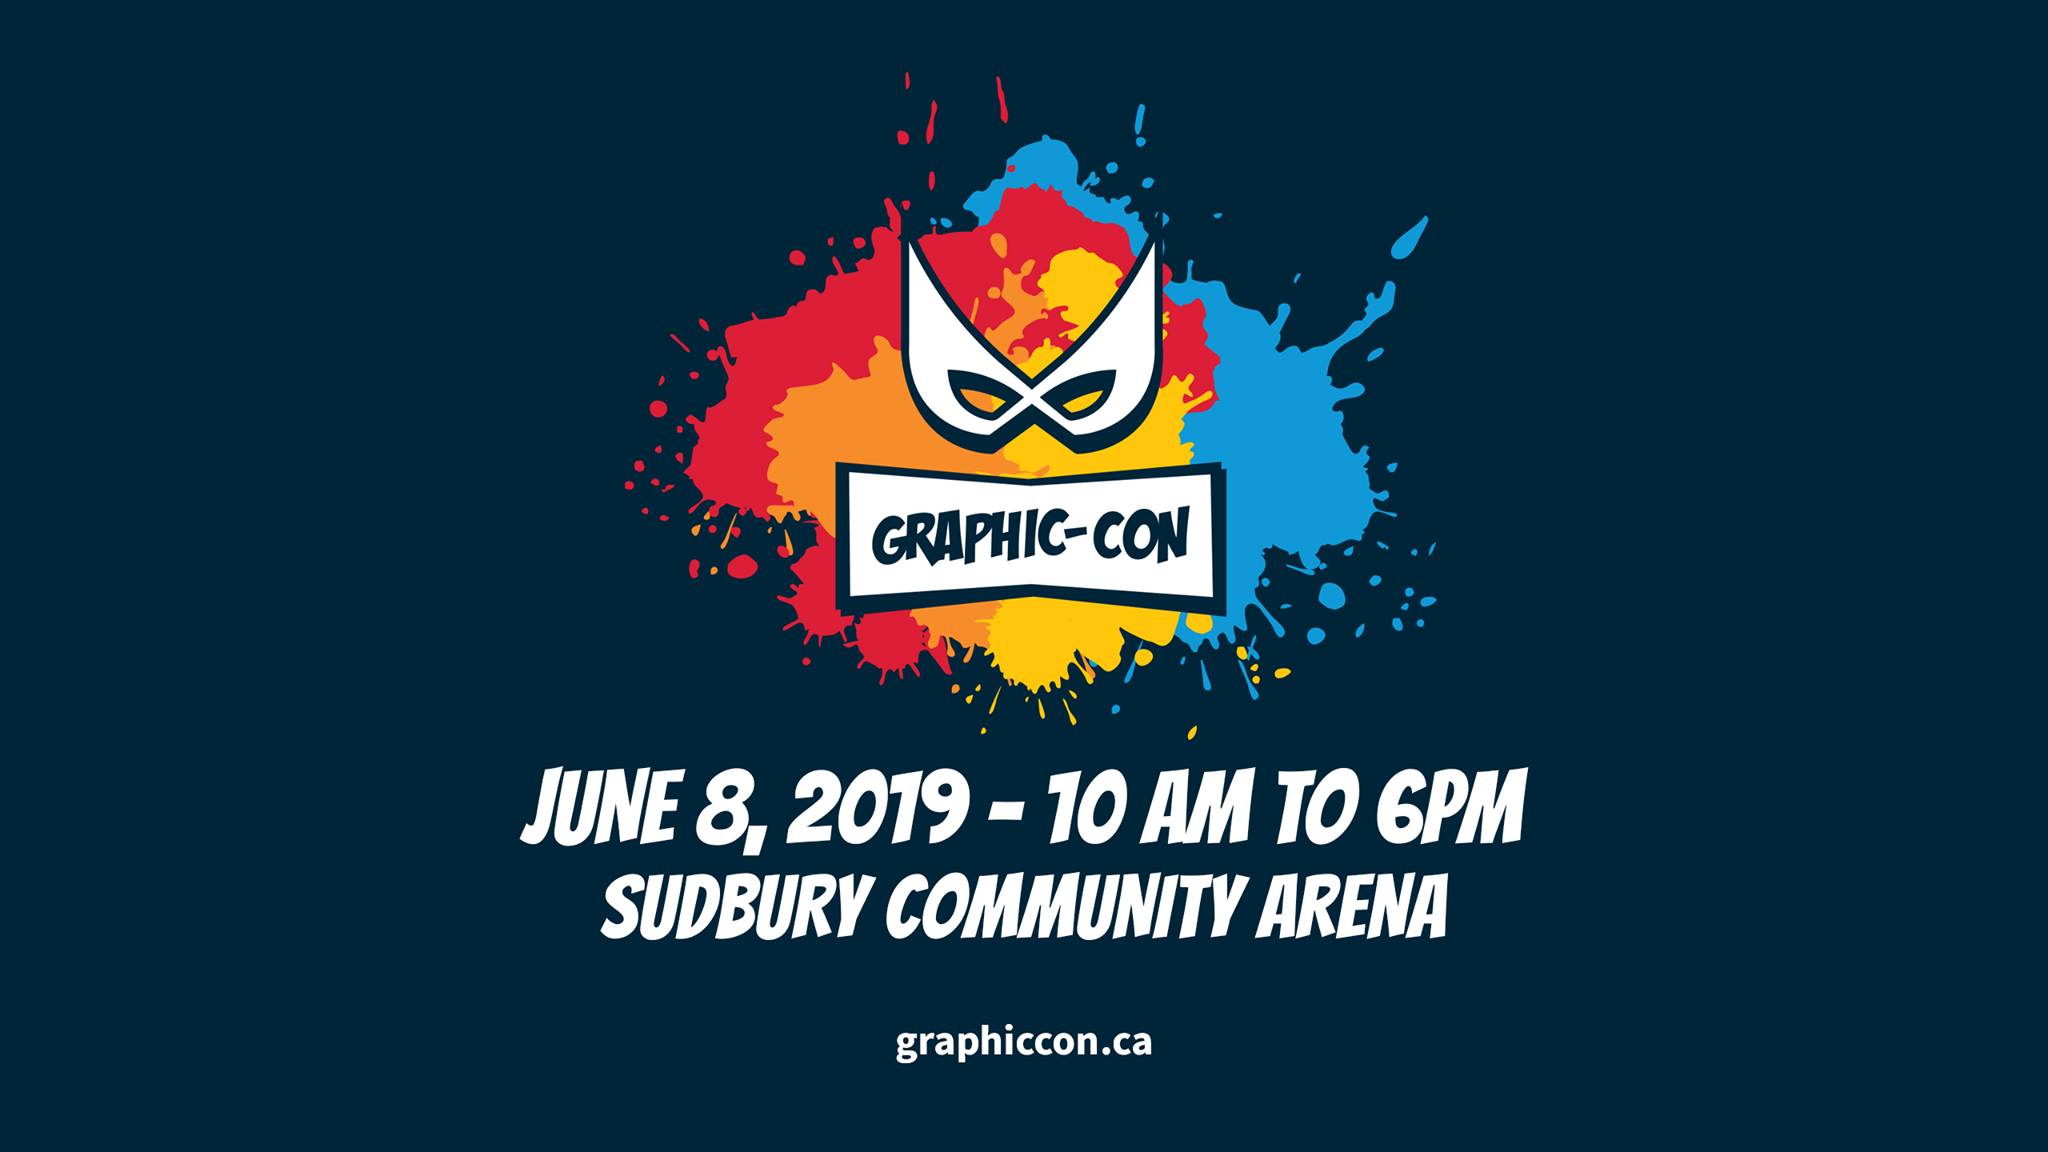 HERE'S WHAT'S UP AT GRAPHIC-CON THIS WEEKEND!